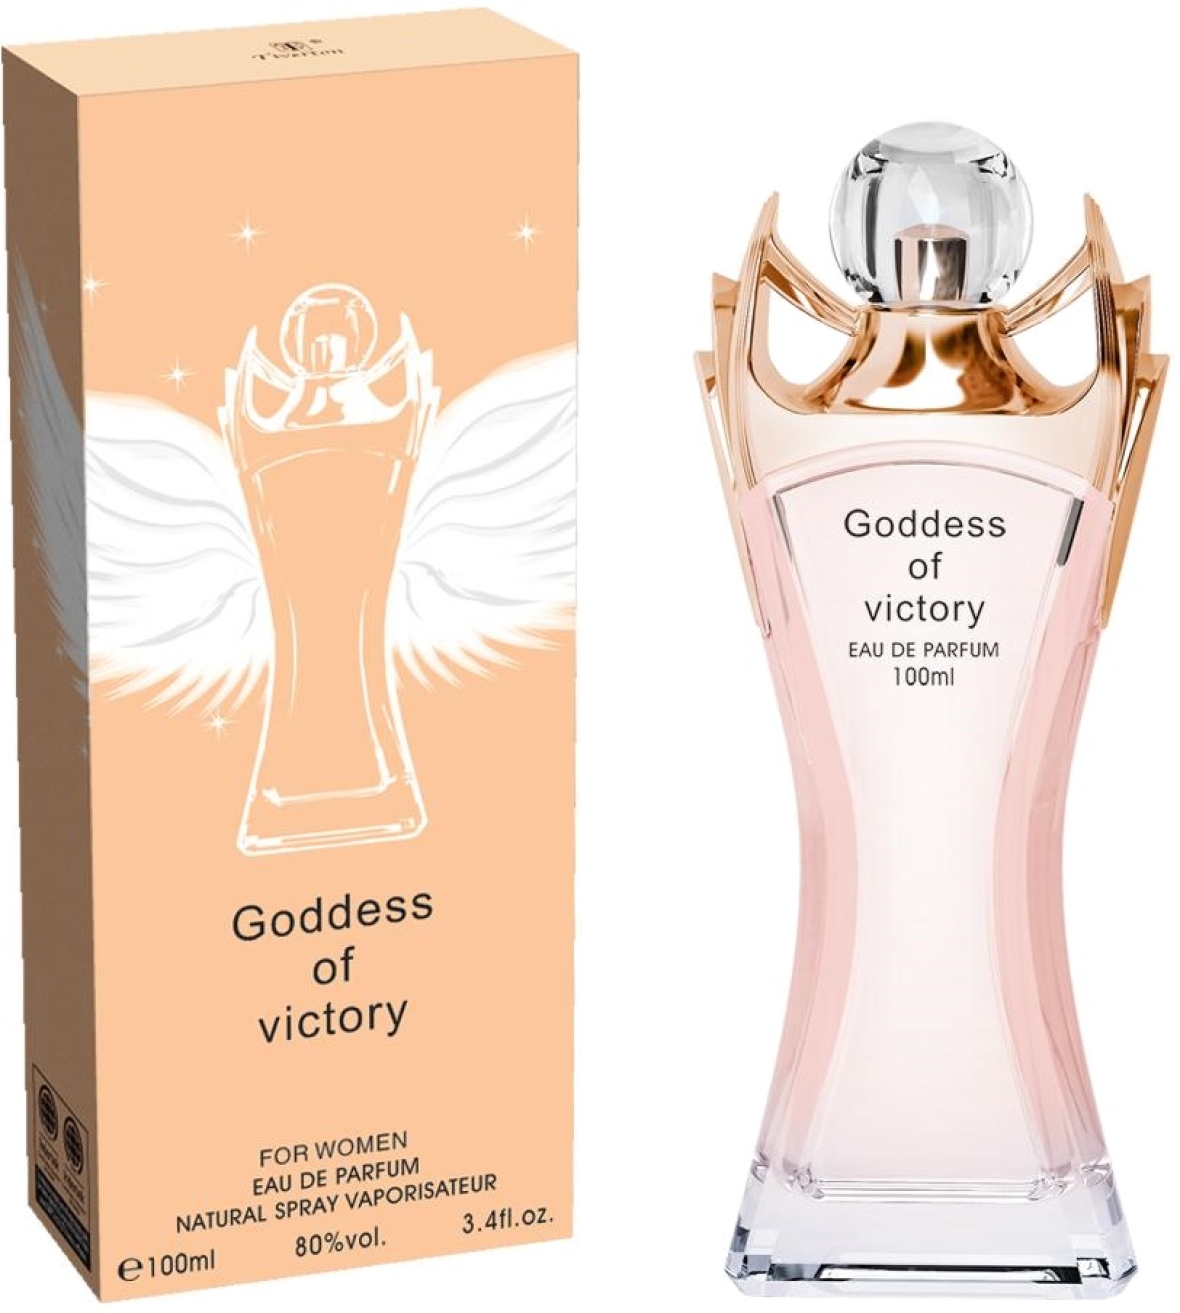 Notre gamme de parfums SF17. GODESS OF VICTORY Financer voyage scolaire